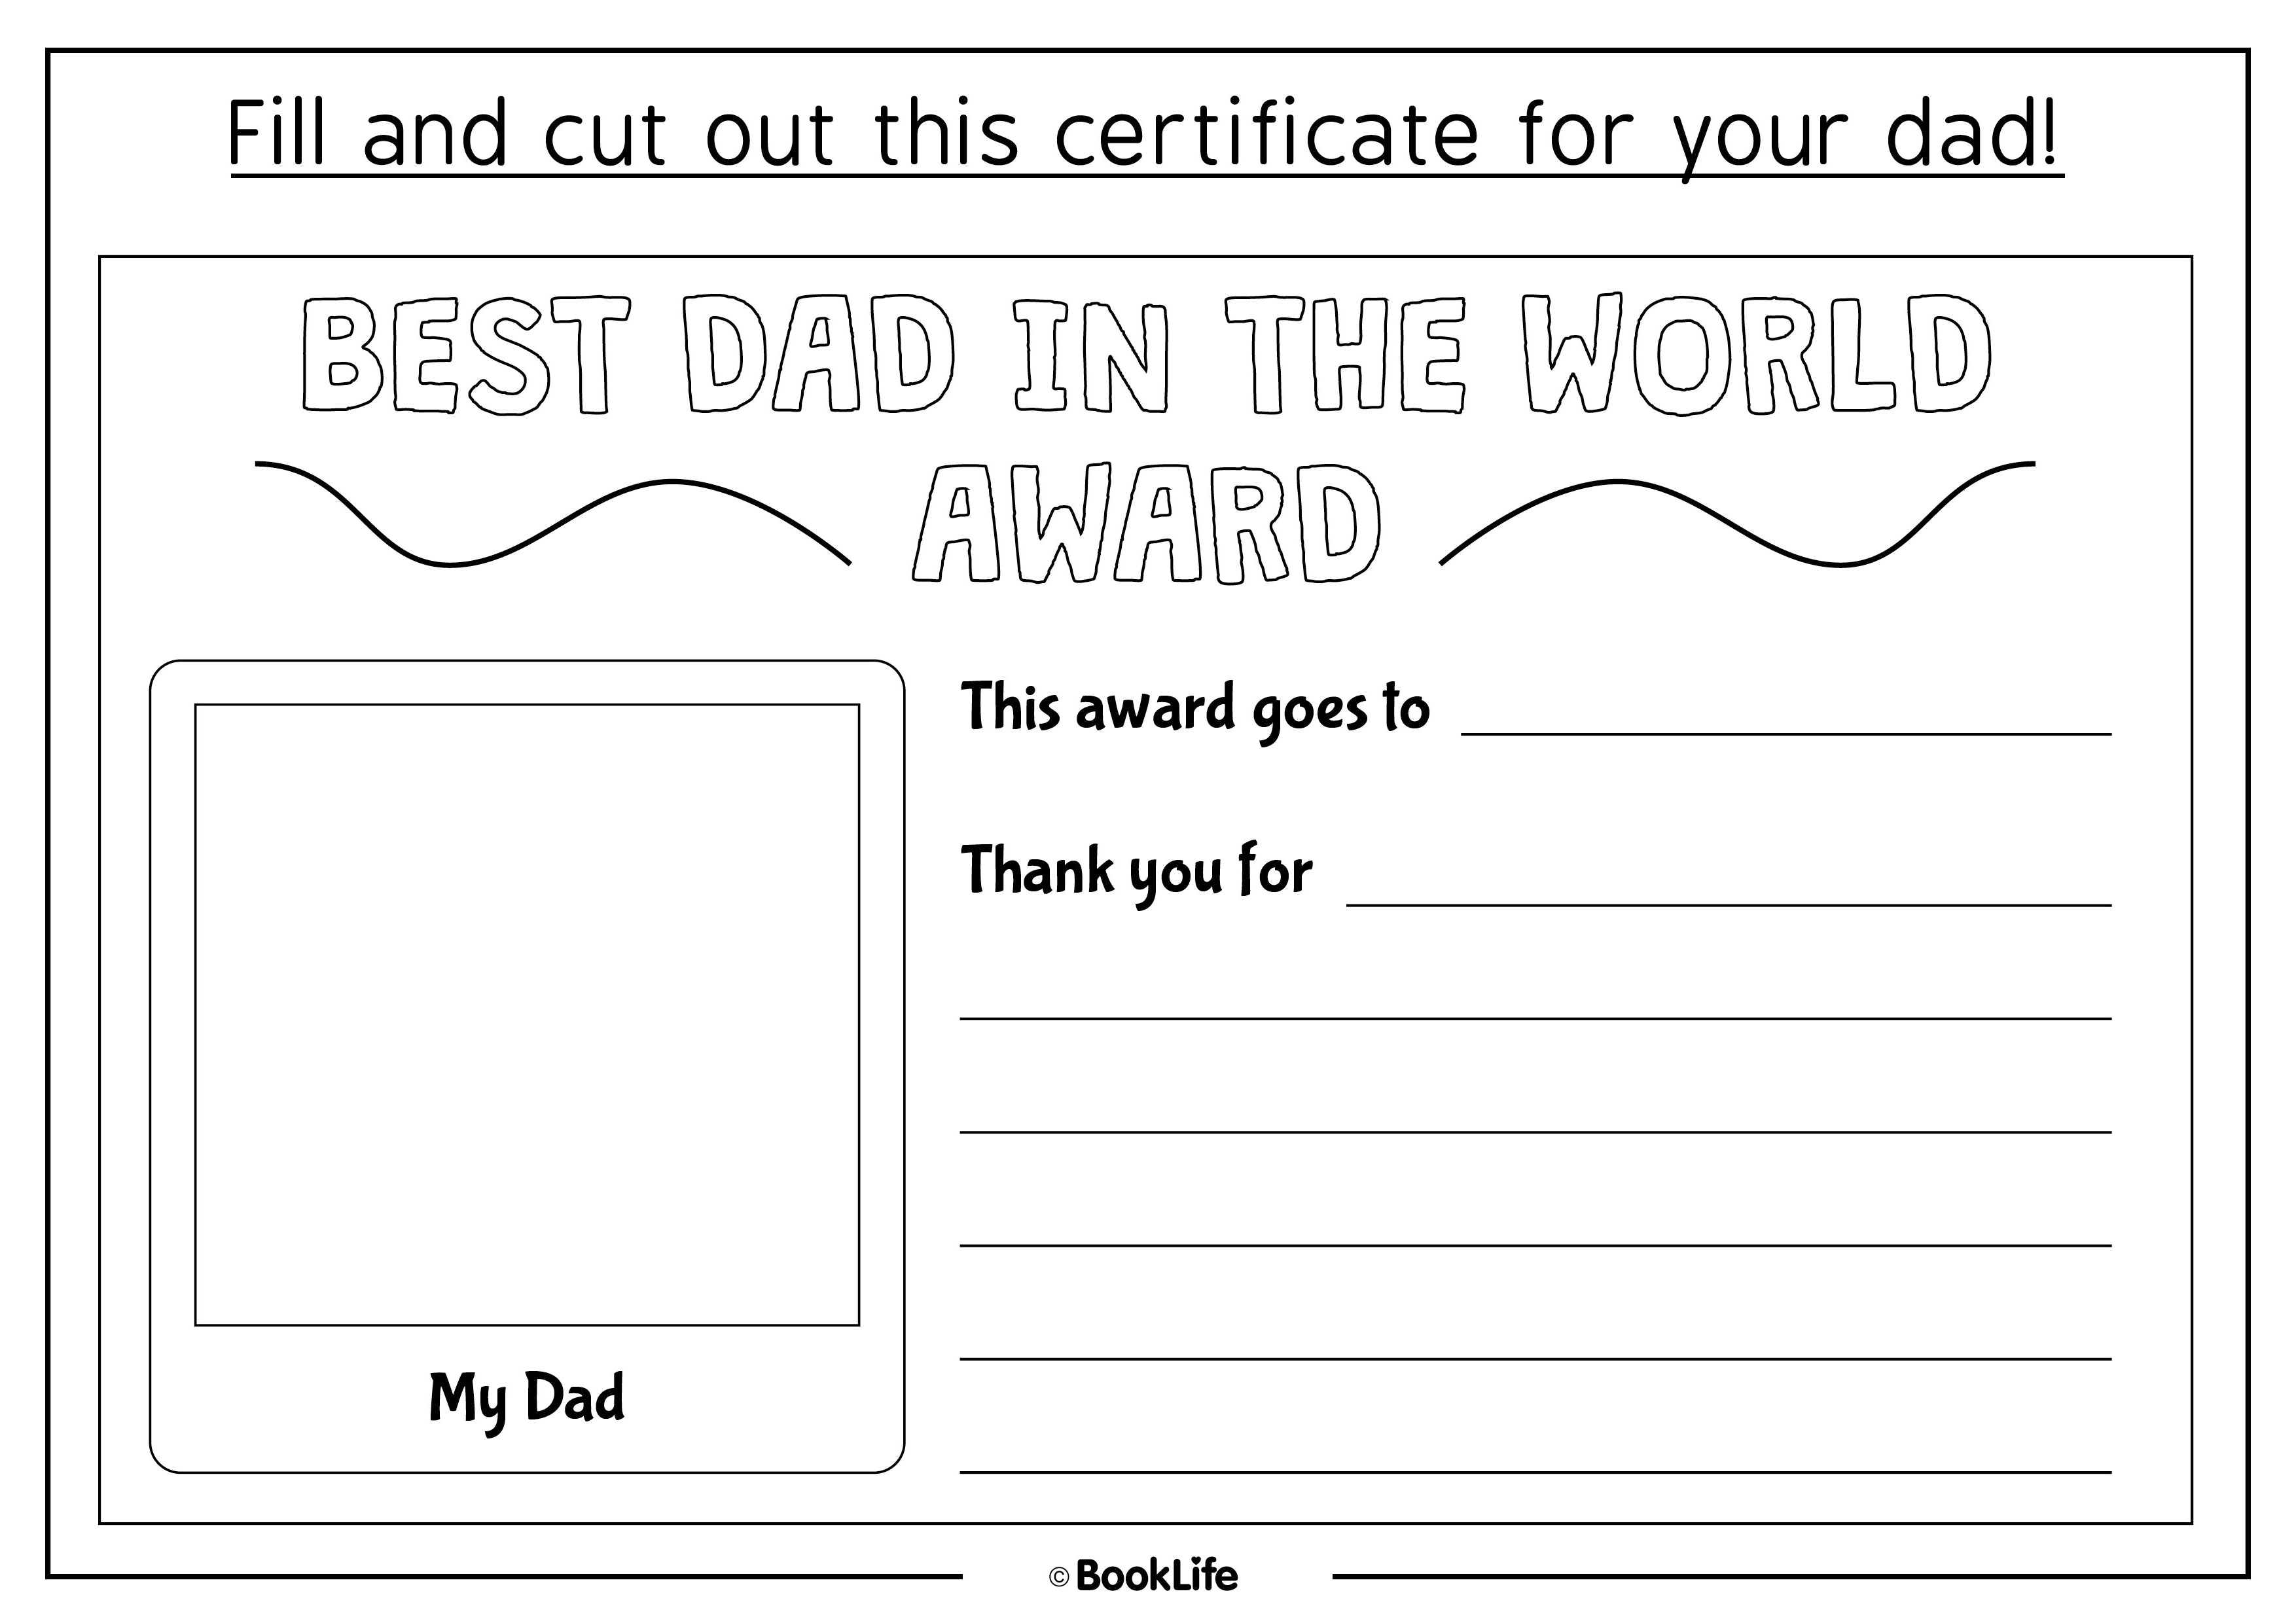 Best Dad in the World Certificate!